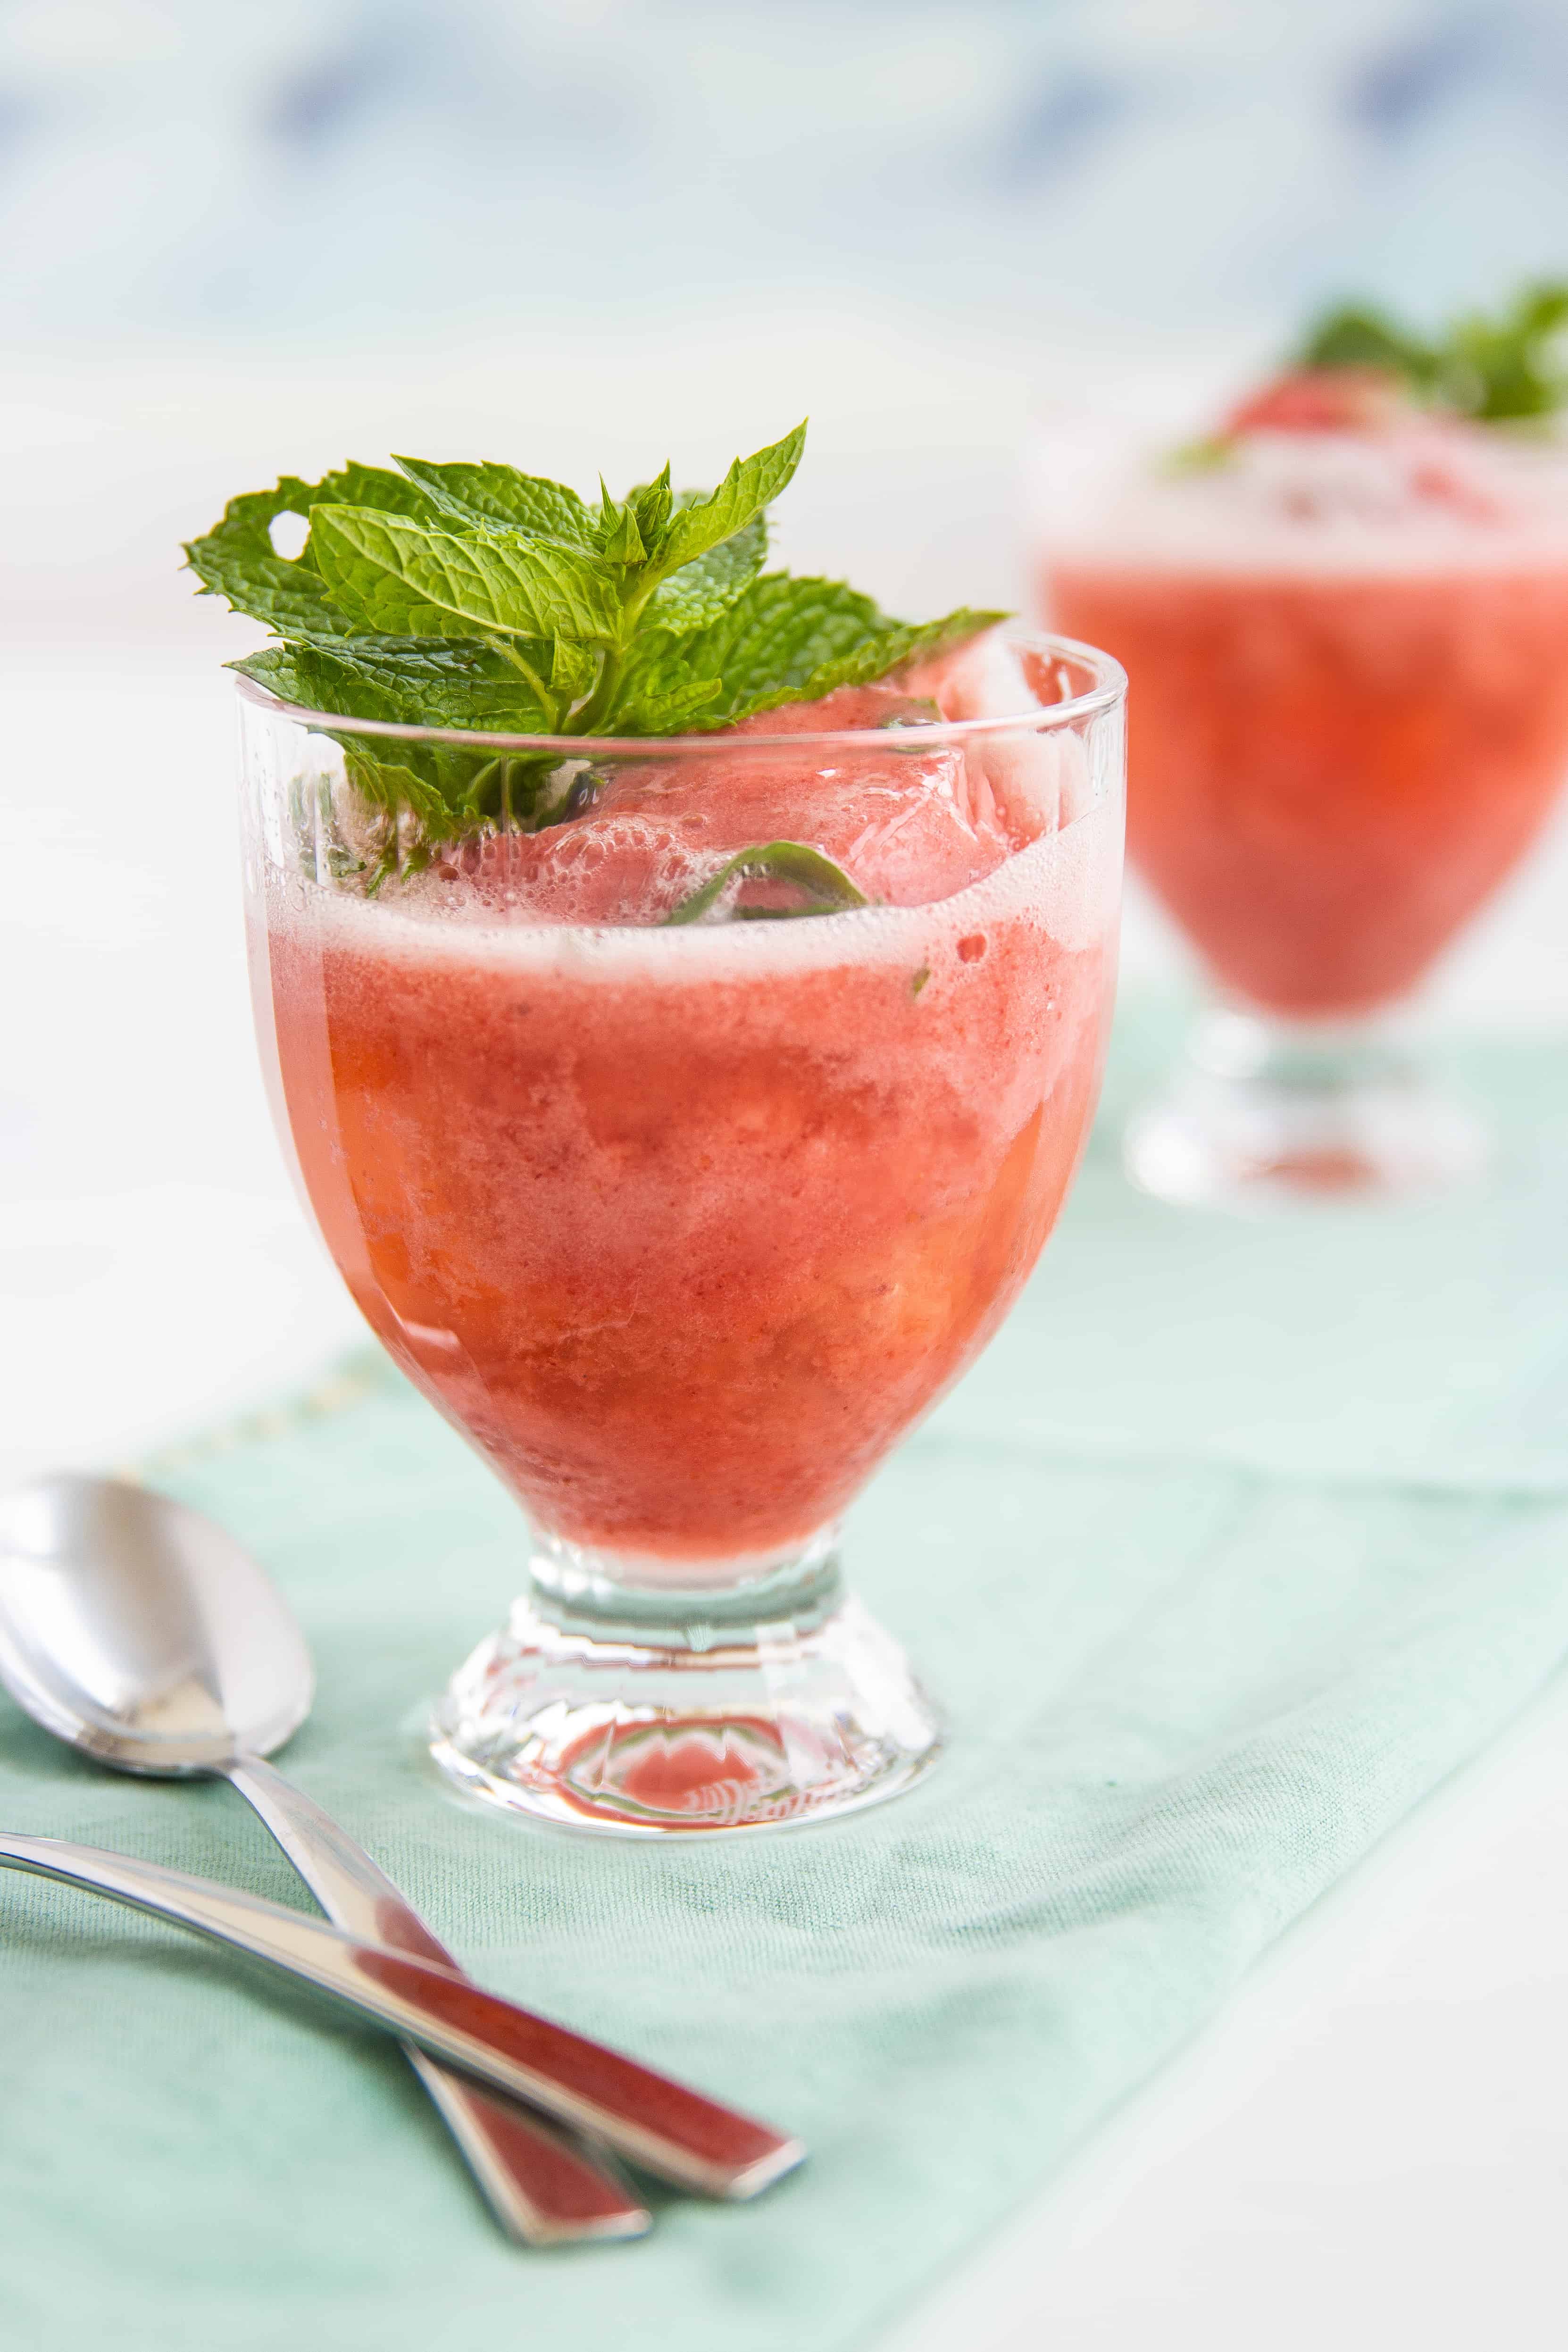 Delicious and Refreshing Strawberry Puree Drink Recipes to Try at Home